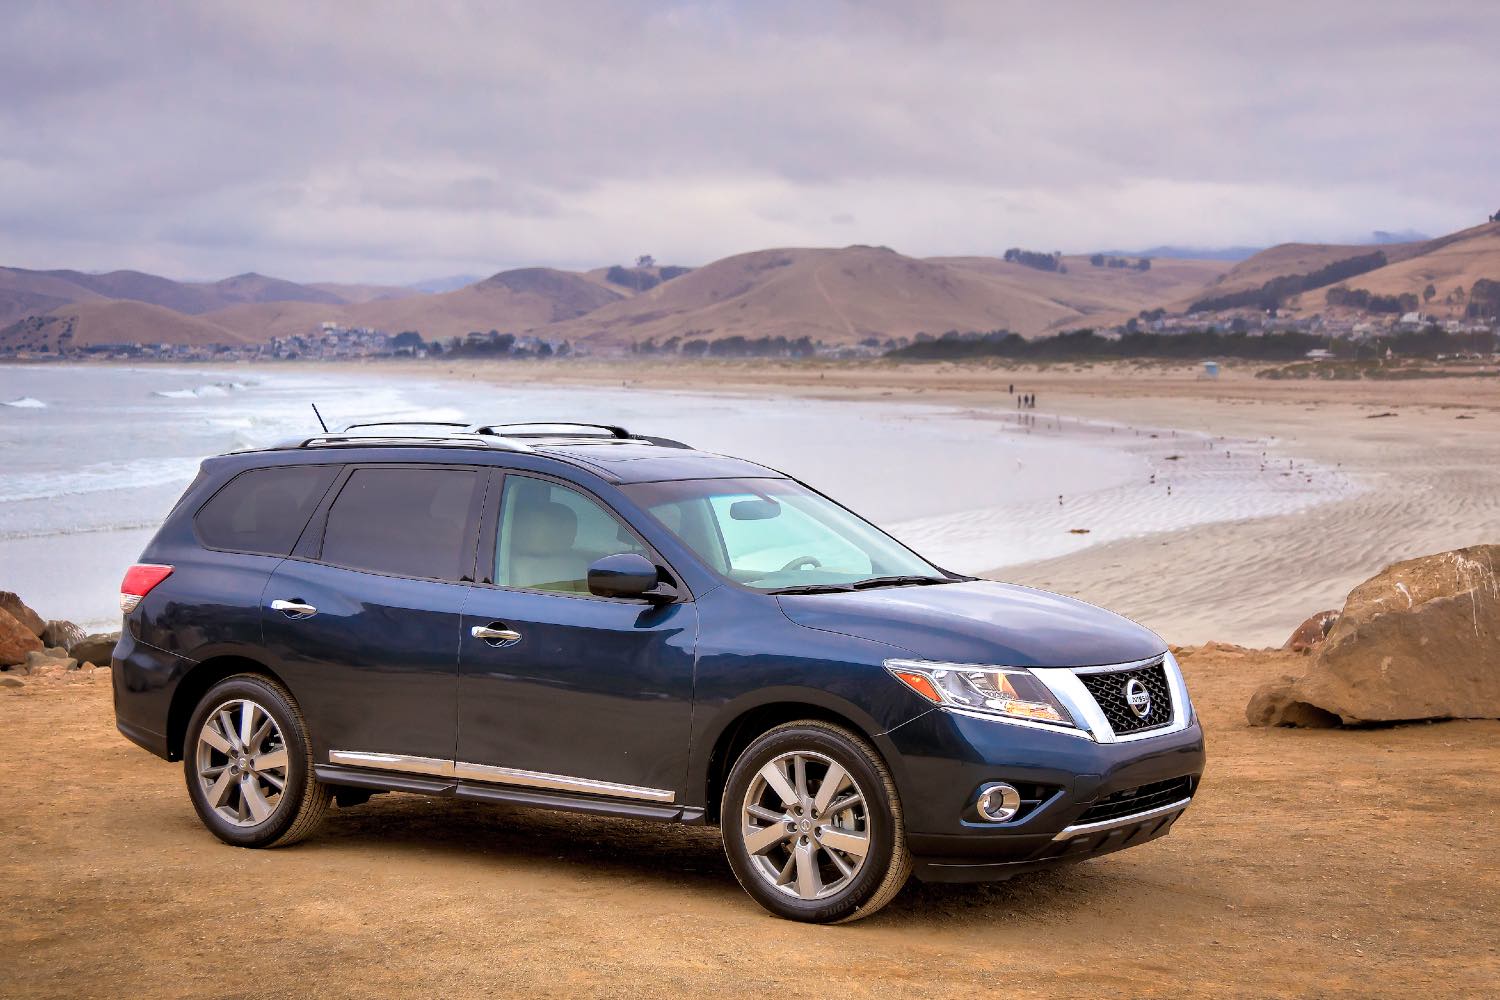 A blue 2014 Nissan Pathfinder on the beach. This SUV has serious transmission problems